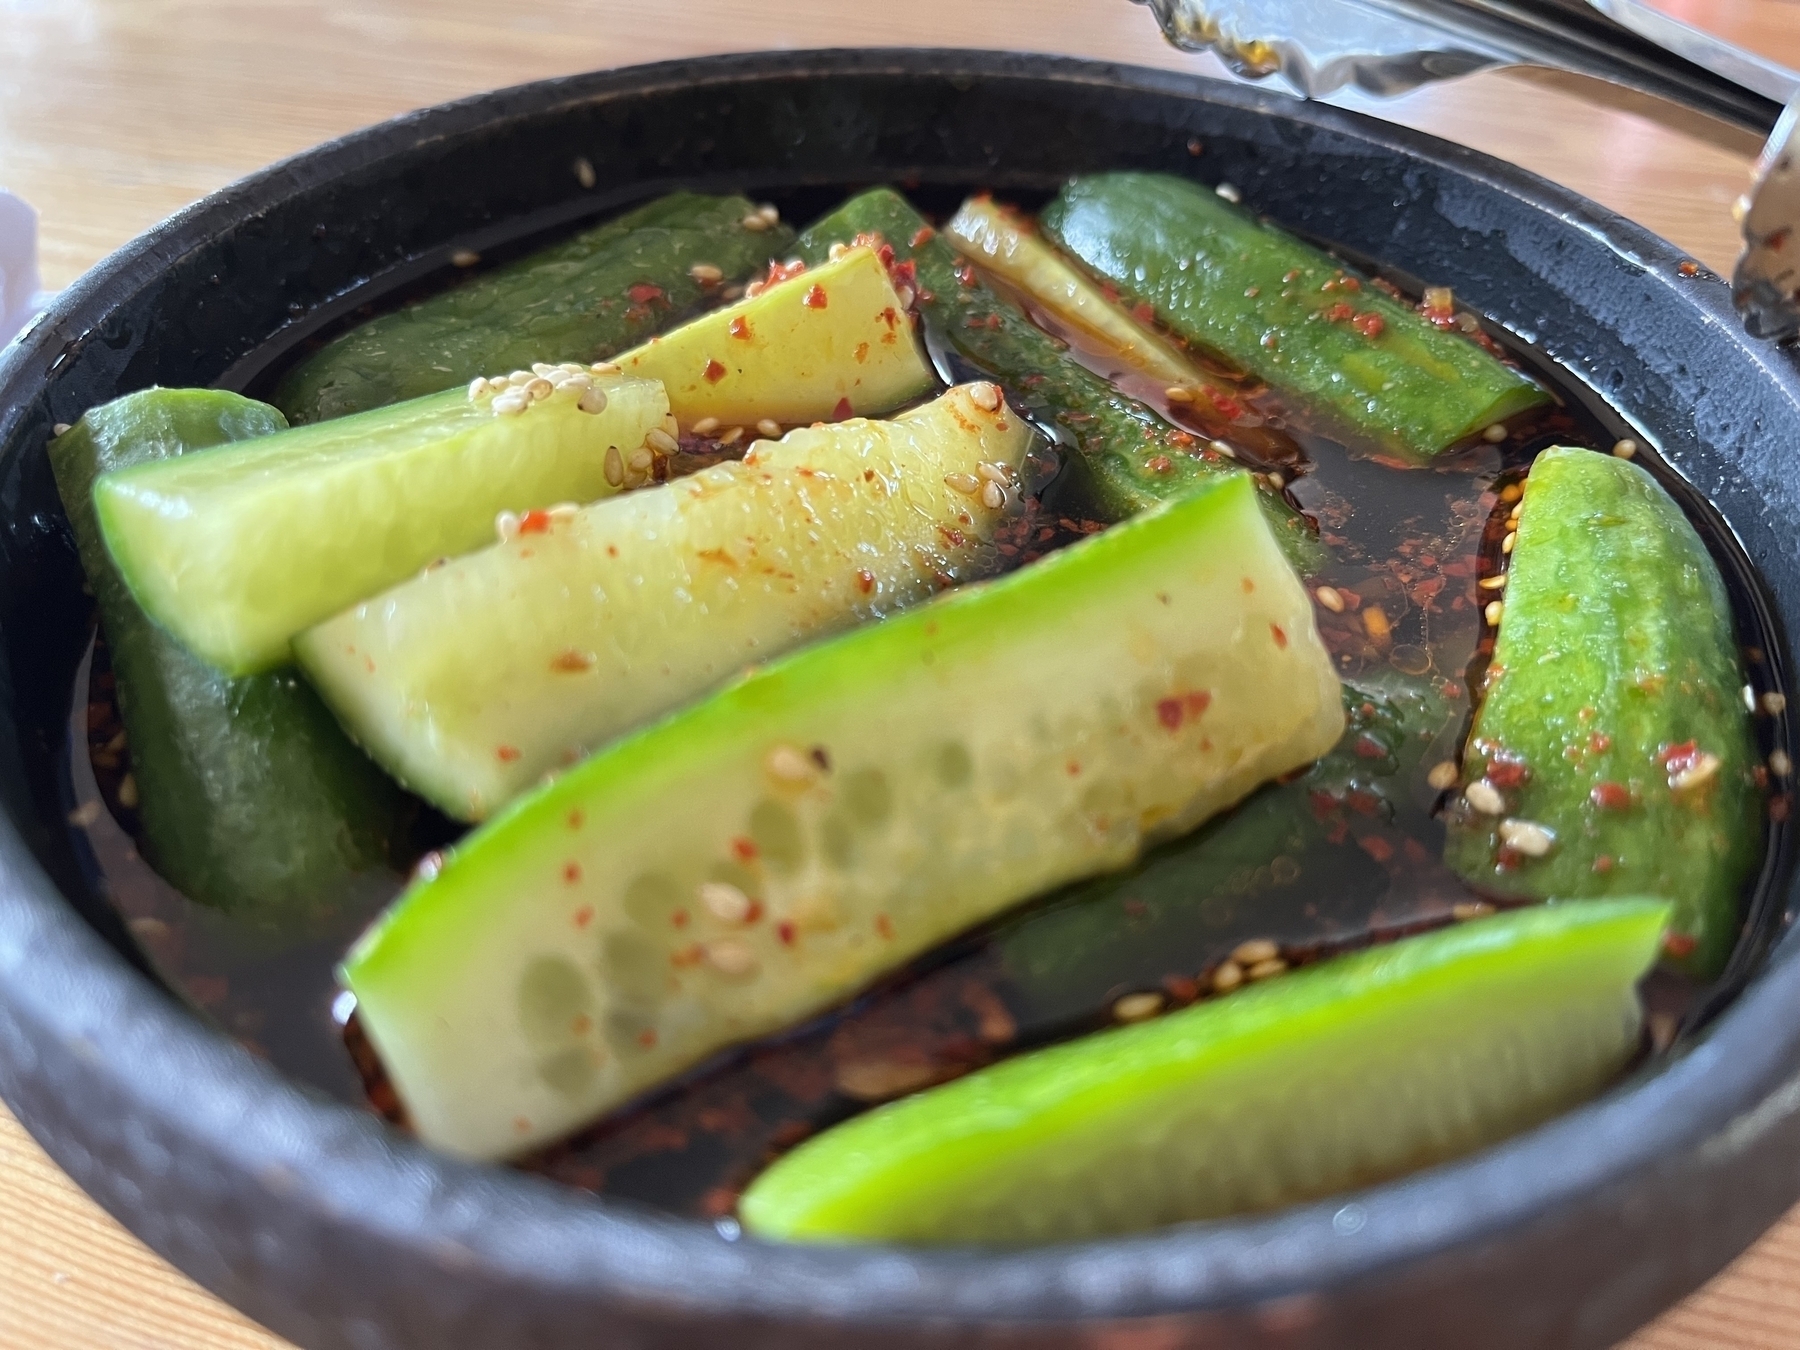 Cucumbers with gochujang sauce and roasted sesame seeds.
